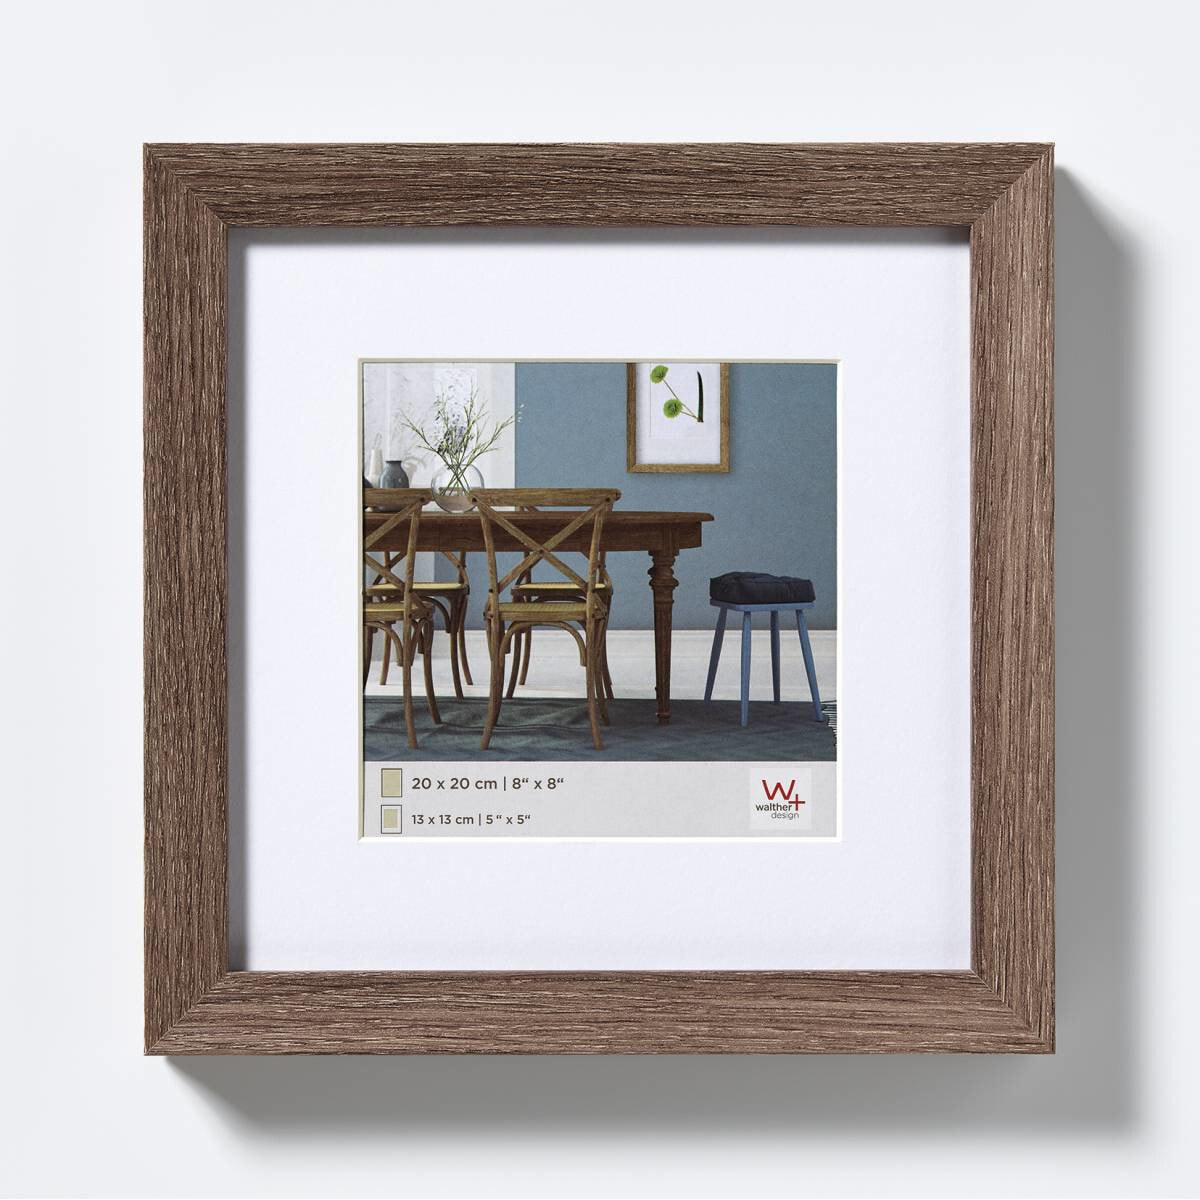 Walther EF220N - MDF - Walnut - Single picture frame - Wall - 13 x 13 cm - Square